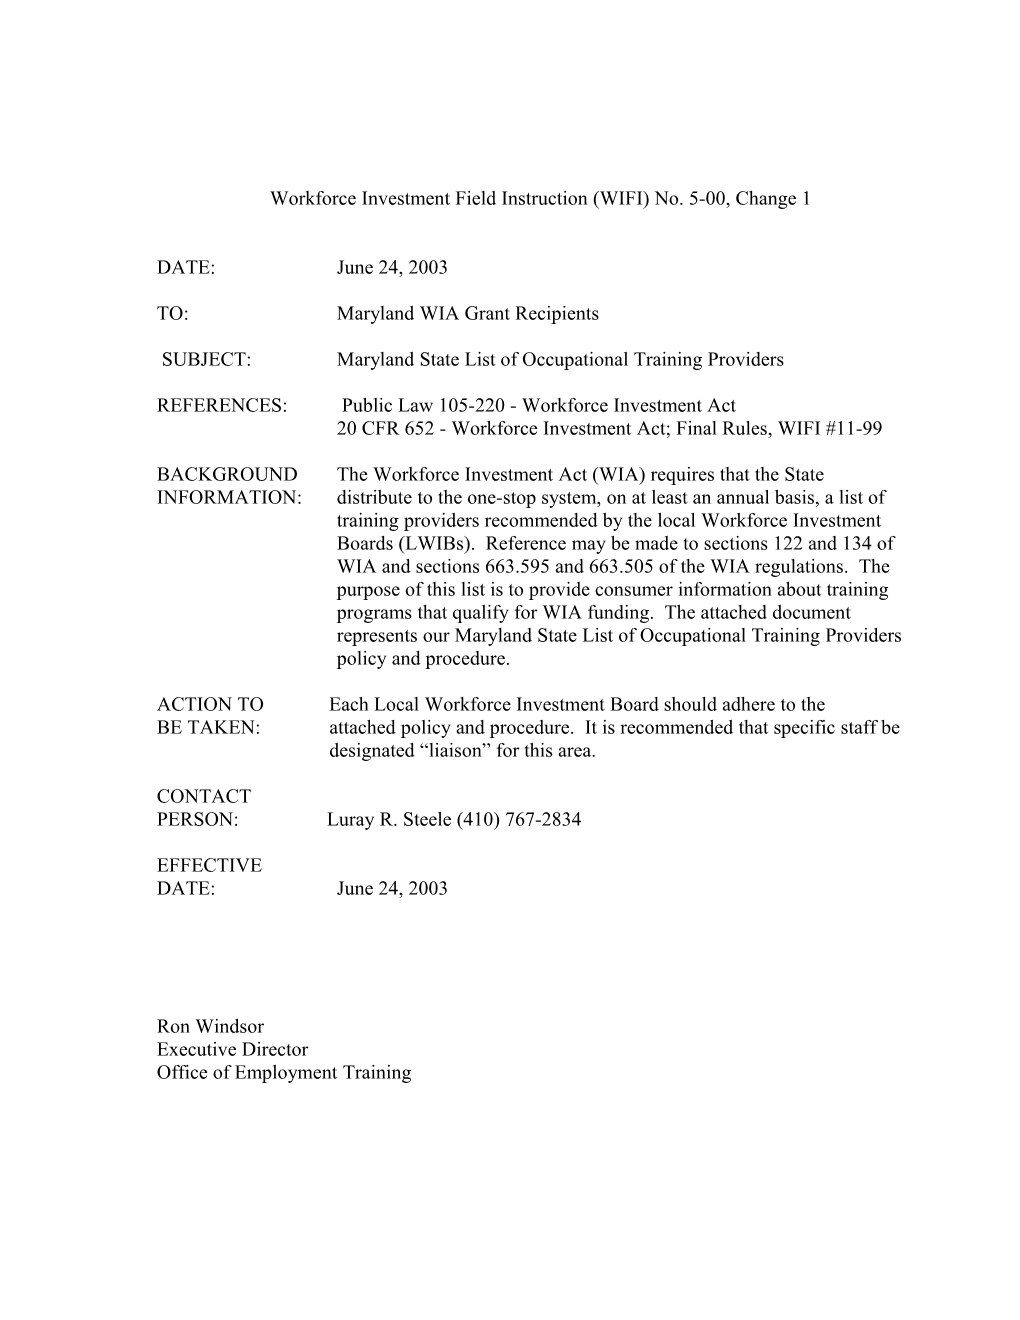 MARYLAND STATE LIST of OCCUPATIONAL TRAINING PROVIDERS PROCEDURE